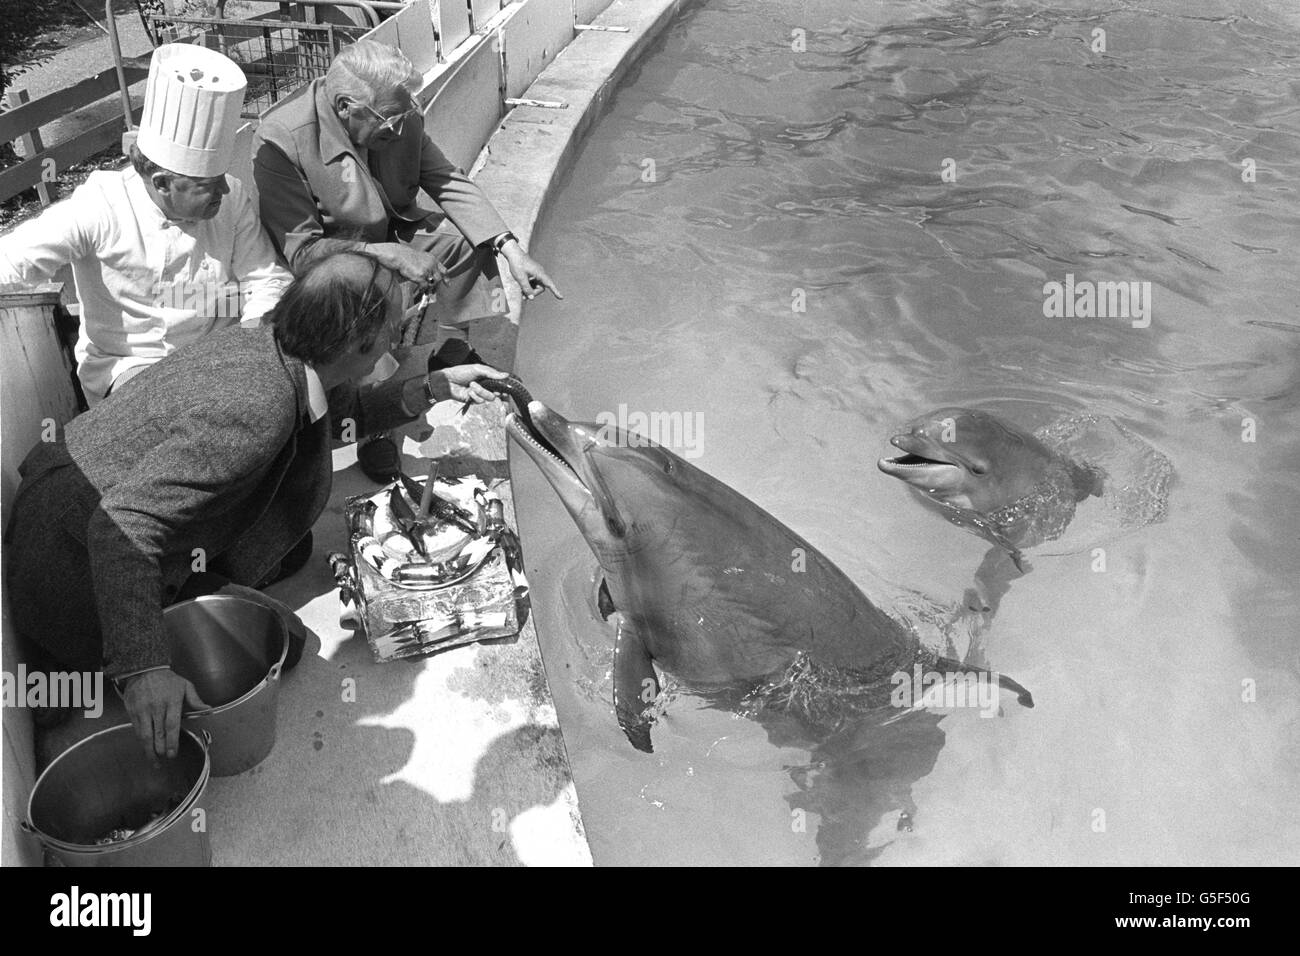 Windsor Safari Park general manager Terry Nutkins feeds fish to dolphin mother Honey, on the occasion of her one year old baby Juno (r) birthday celebrations at the safari park today. Stock Photo